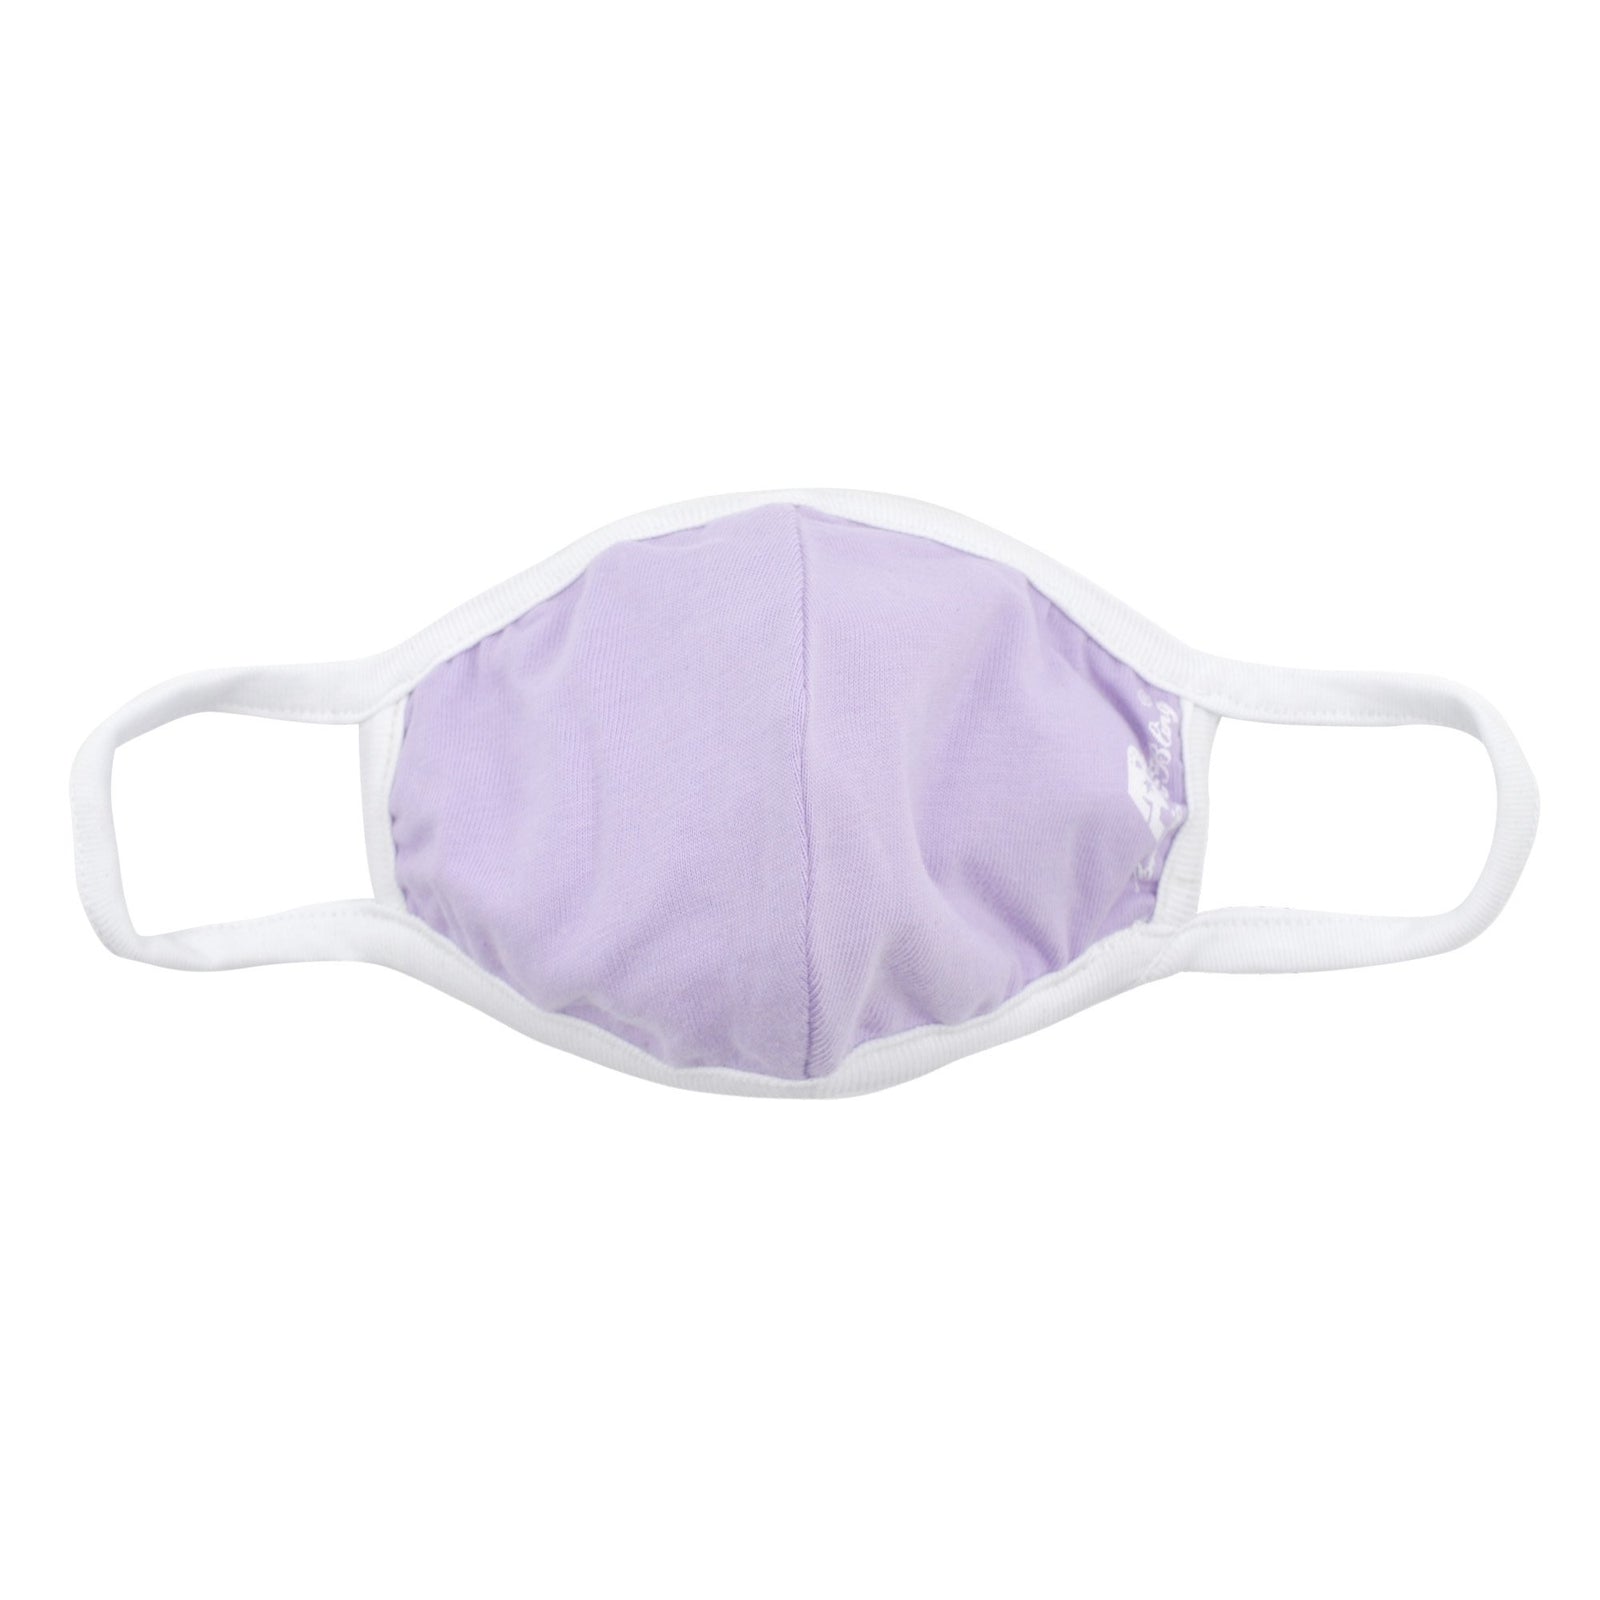 FCM-KD01 American Bling Kid Fabric Face Mask Double Layer with Adjustable Nose Clip 1PC  Pack